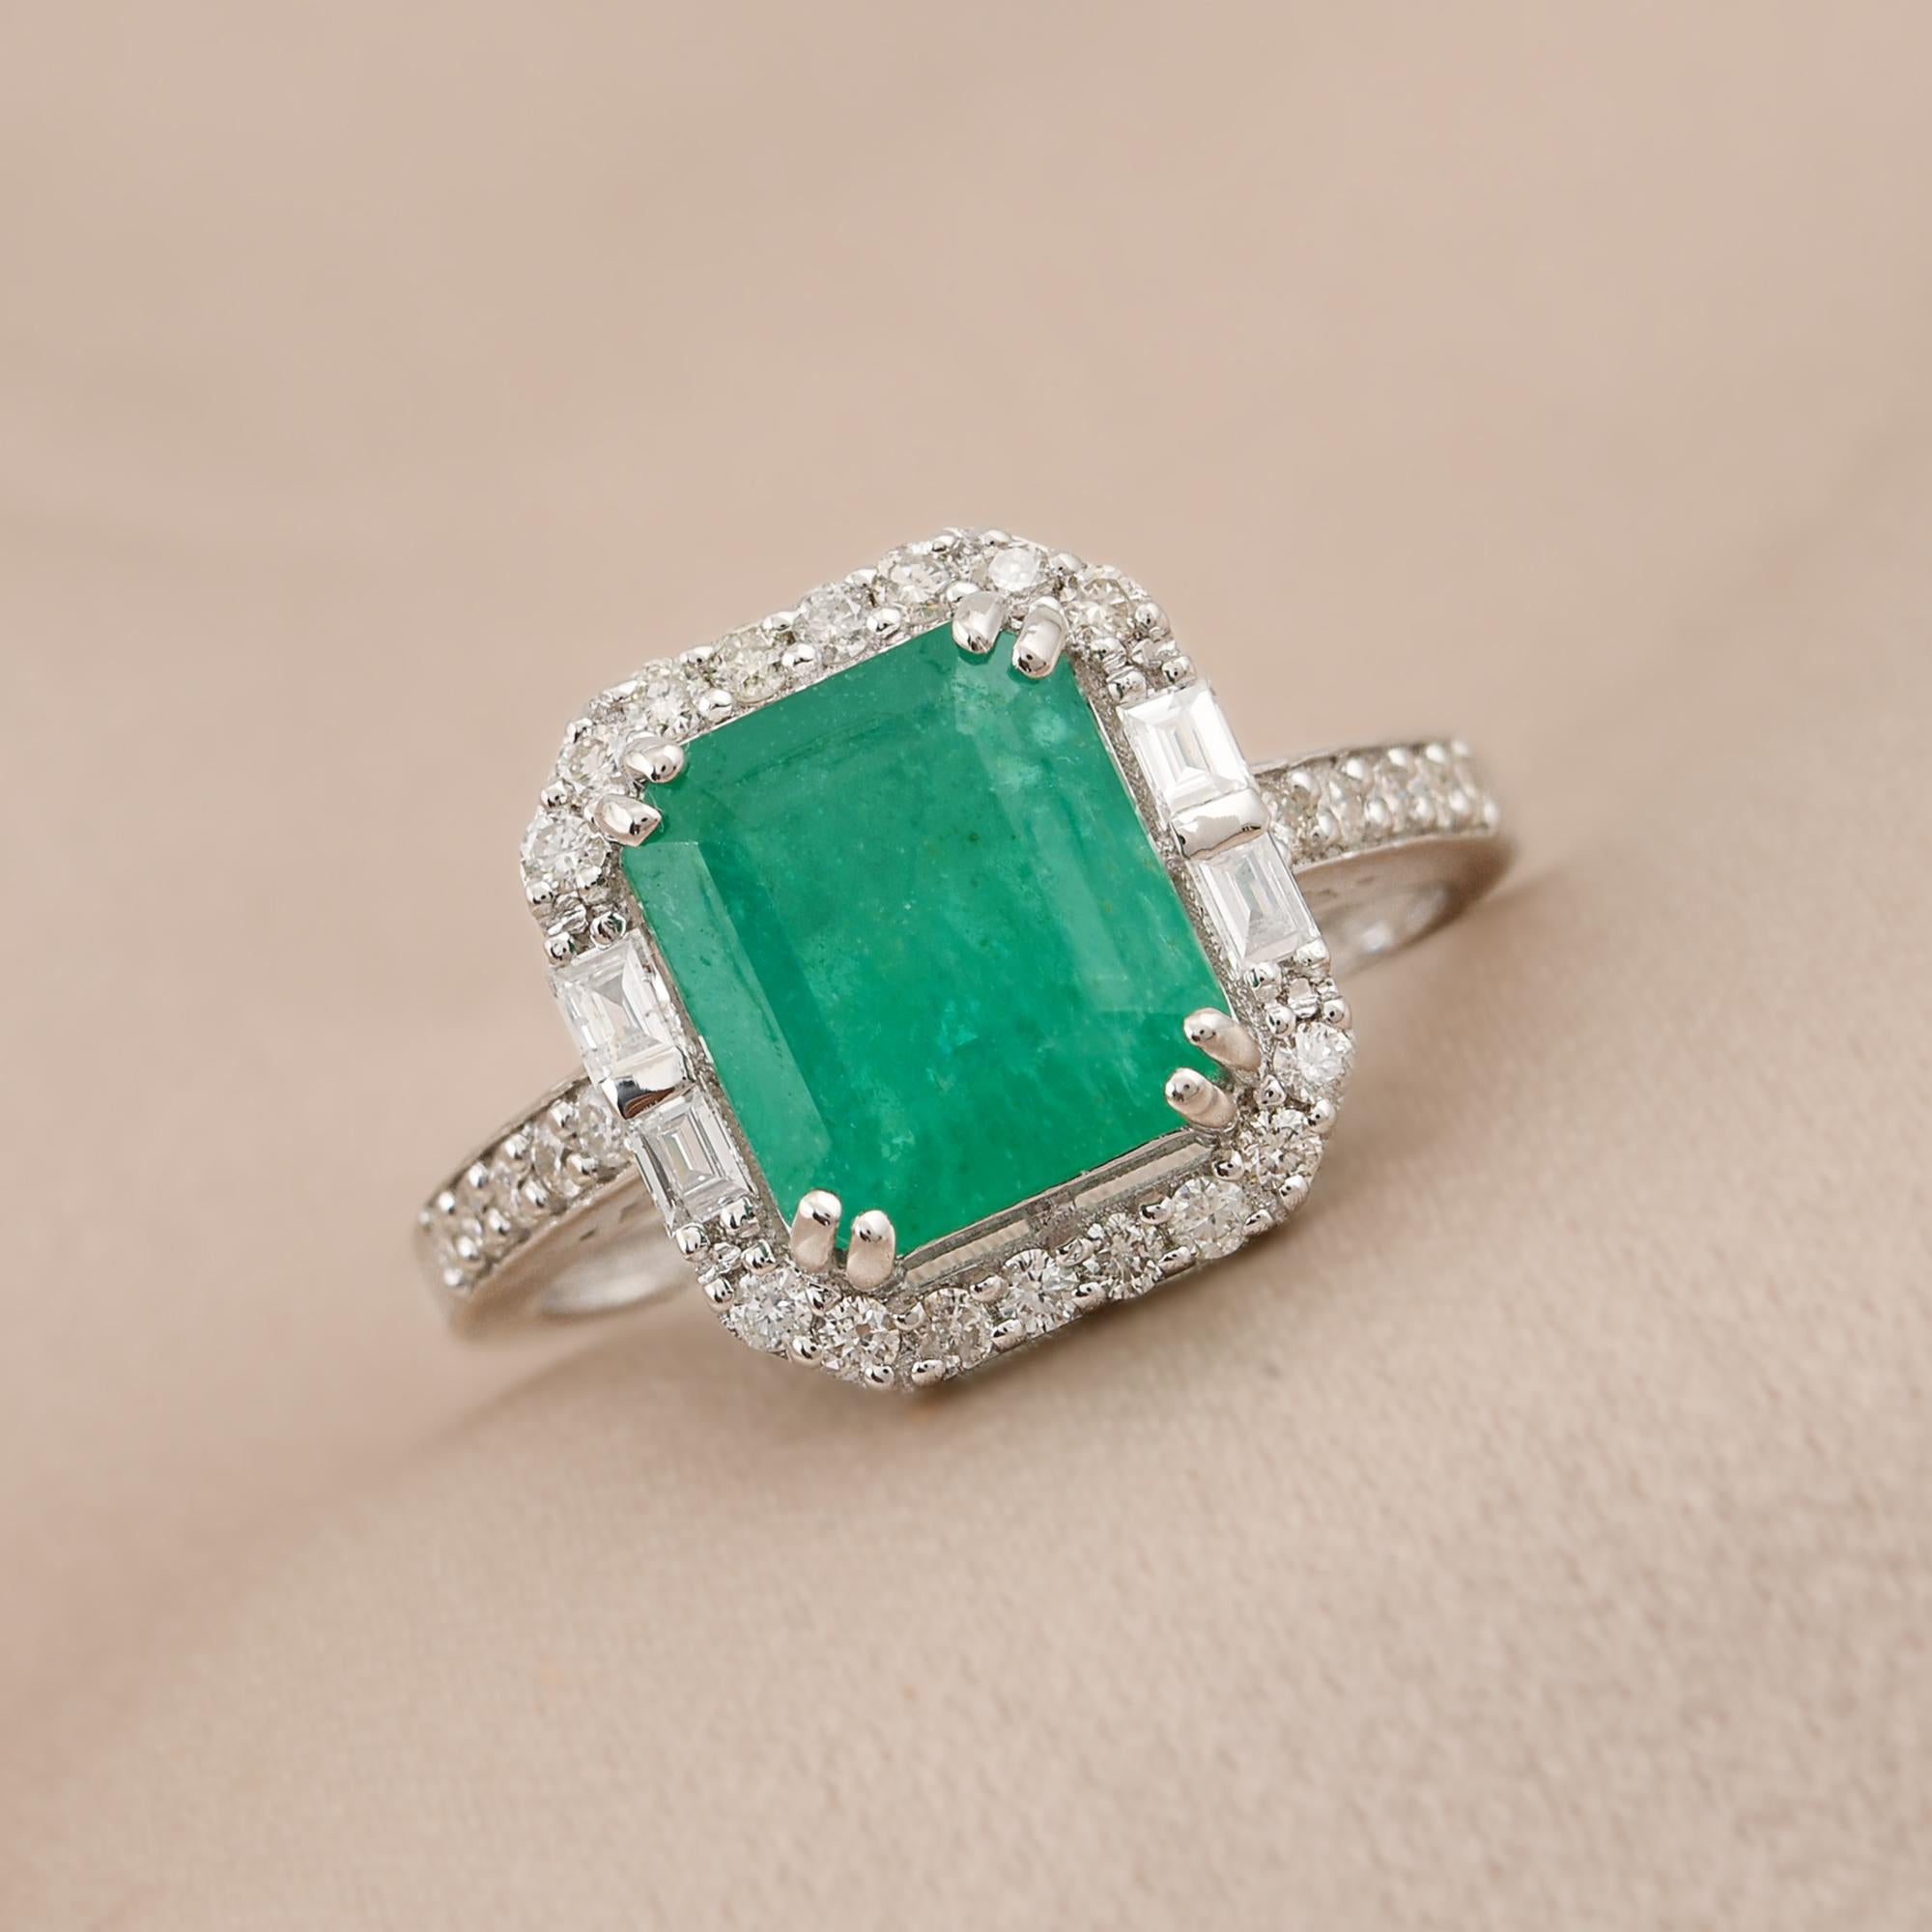 Natural Emerald Gemstone Cocktail Ring Baguette Diamond 14k White Gold Jewelry For Sale 1